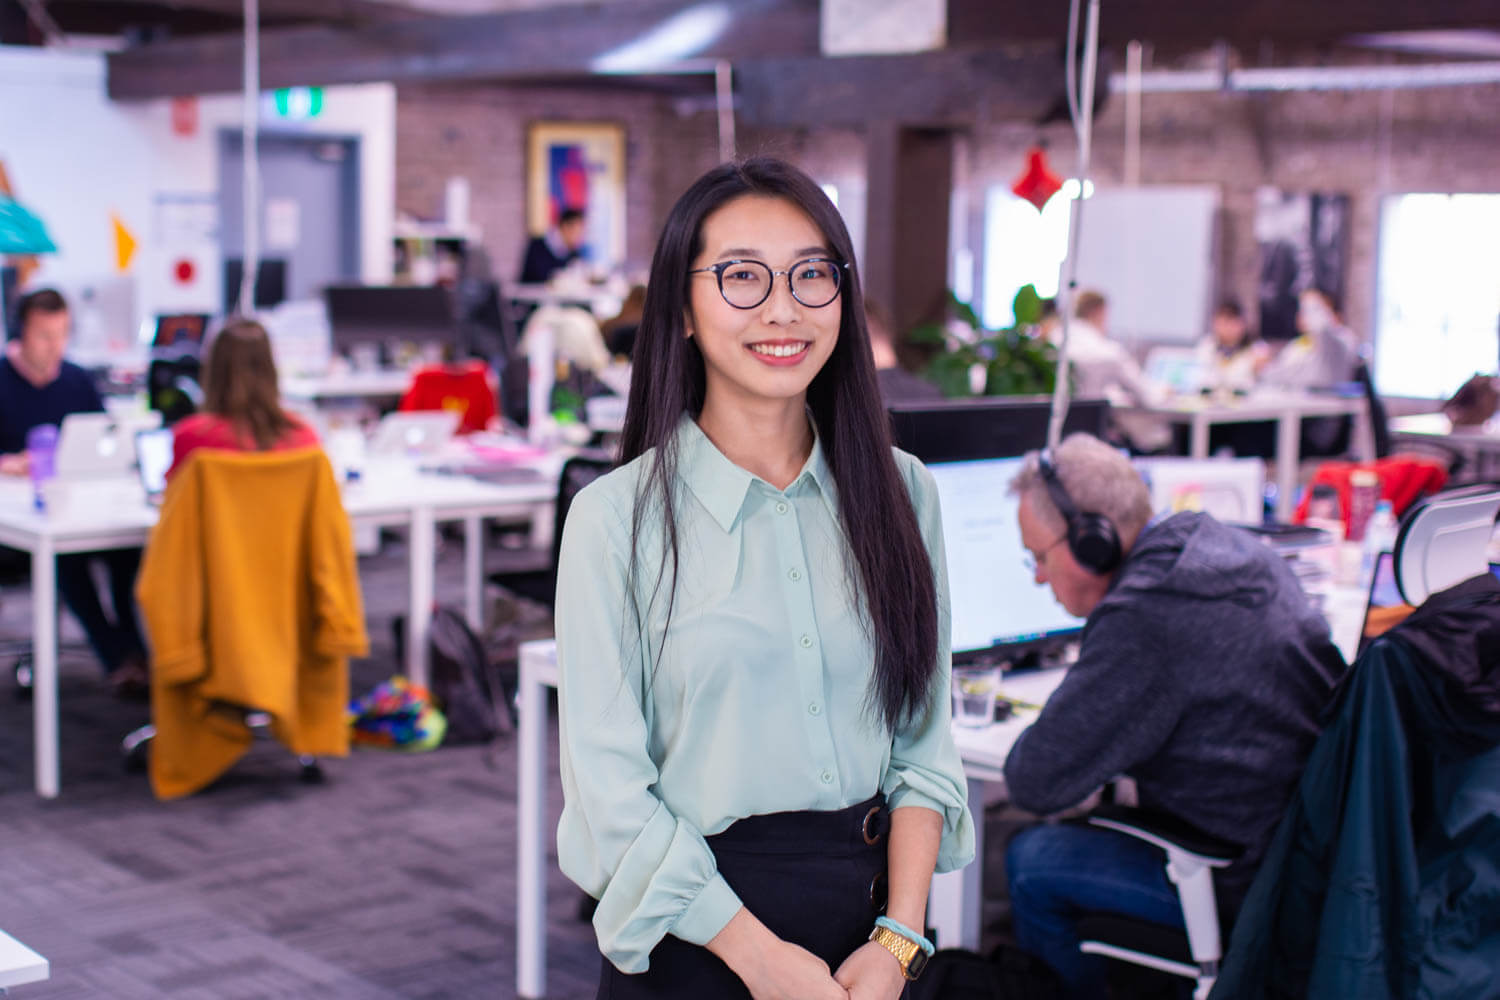 This programme helps international students launch startups in Australia